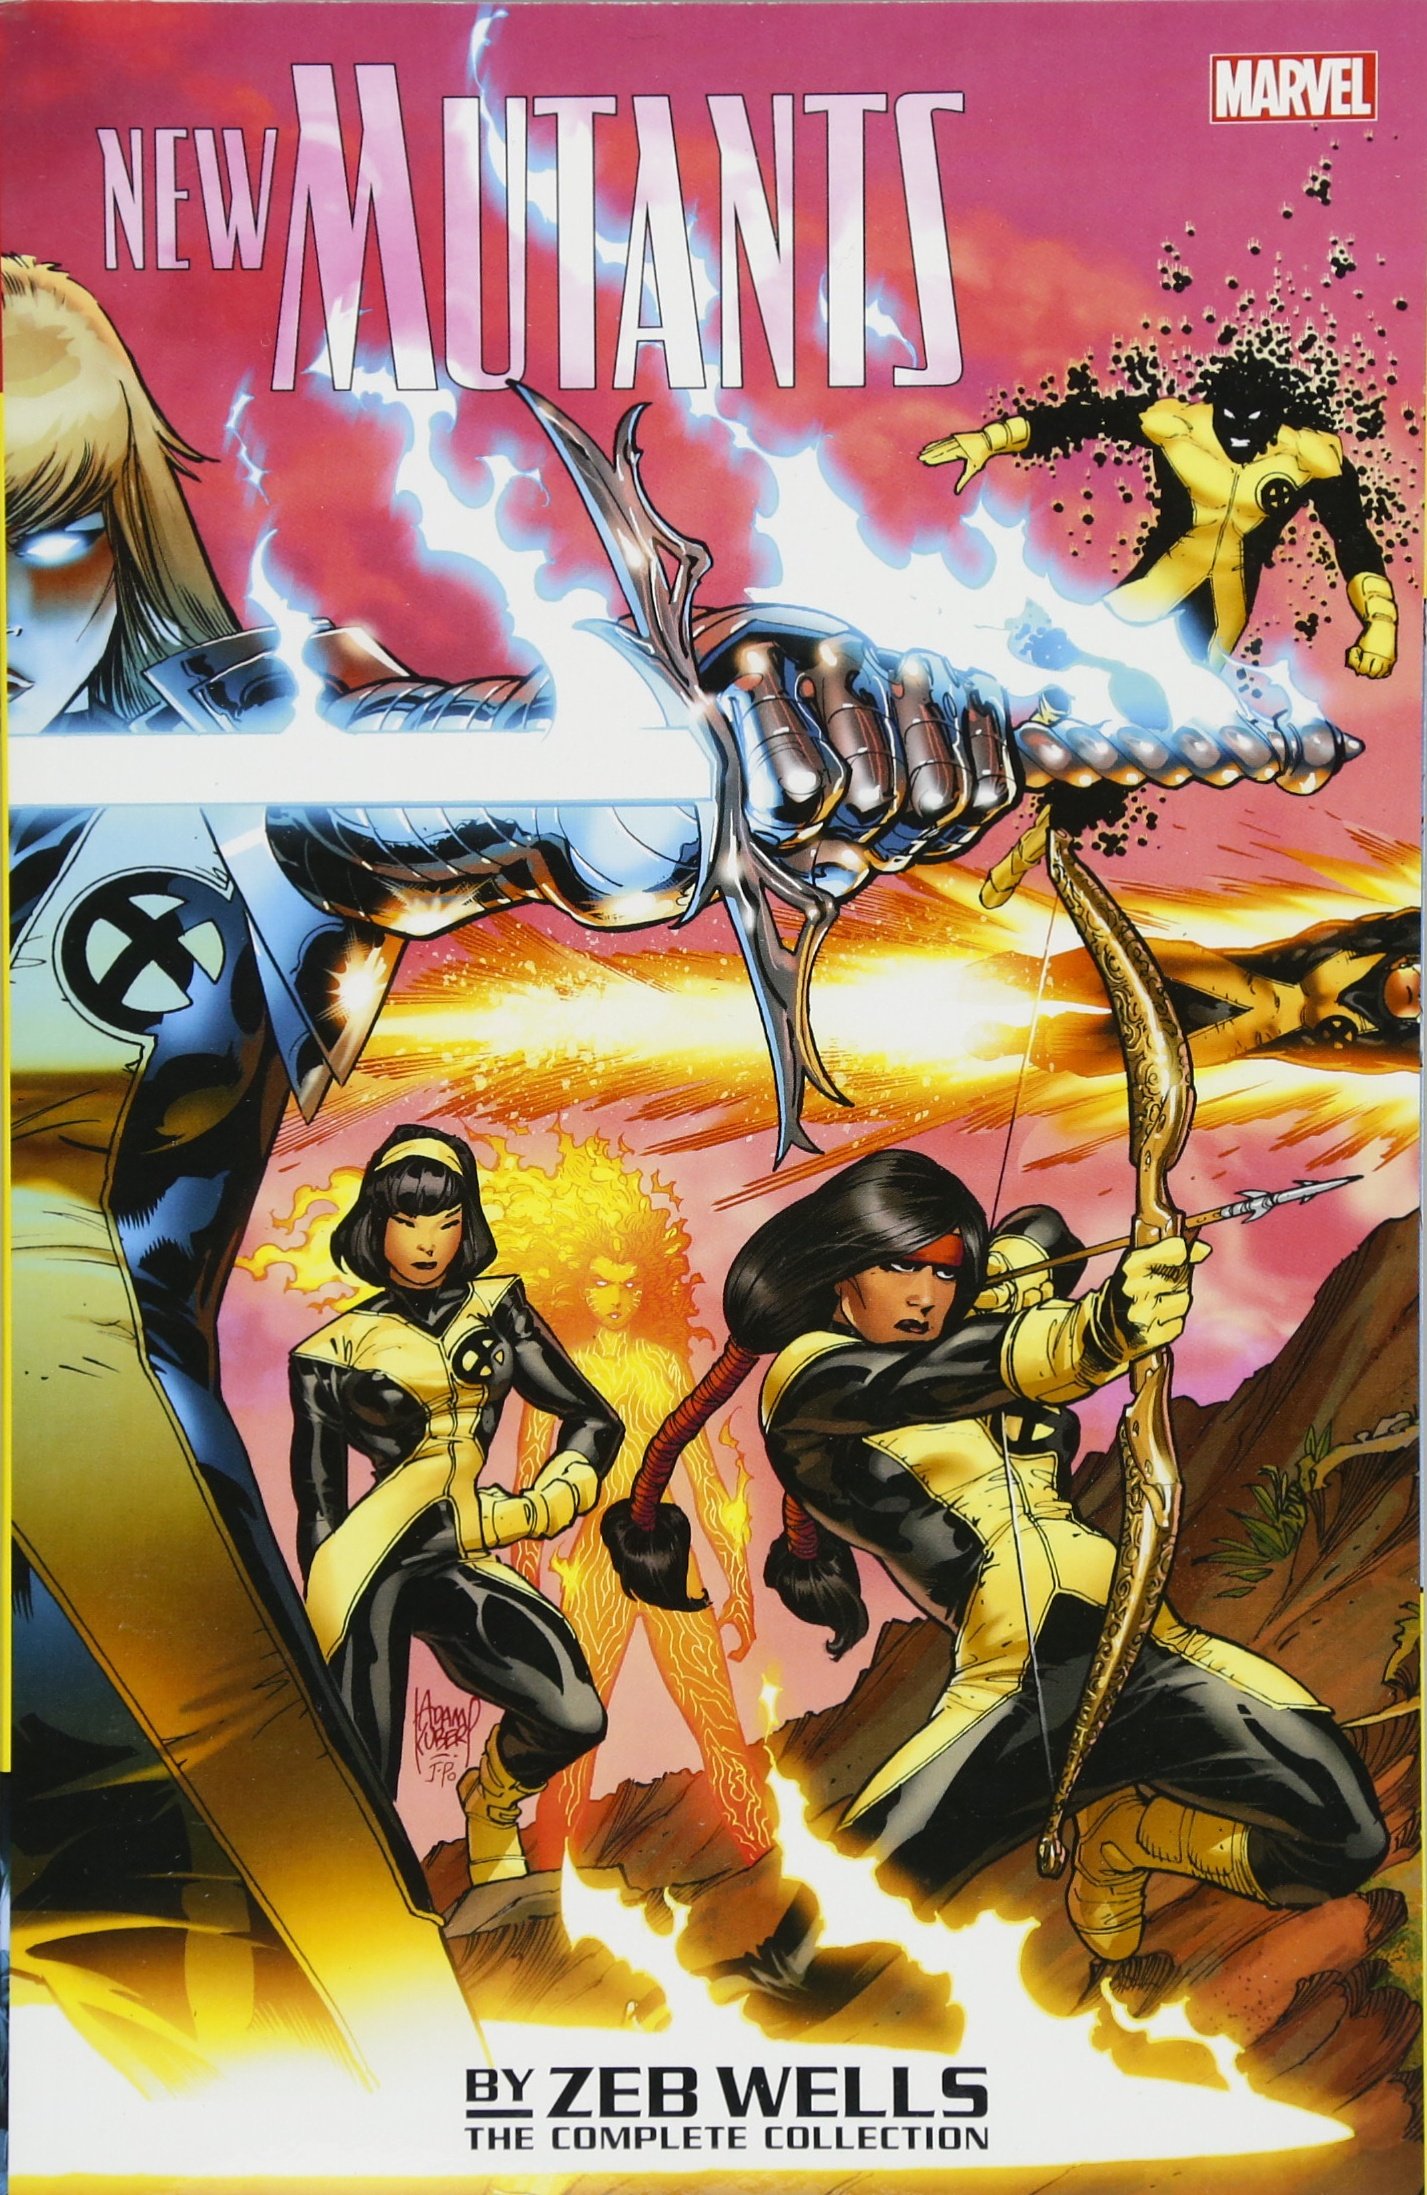 Image for "New Mutants by Zeb Wells: The Complete Collection"